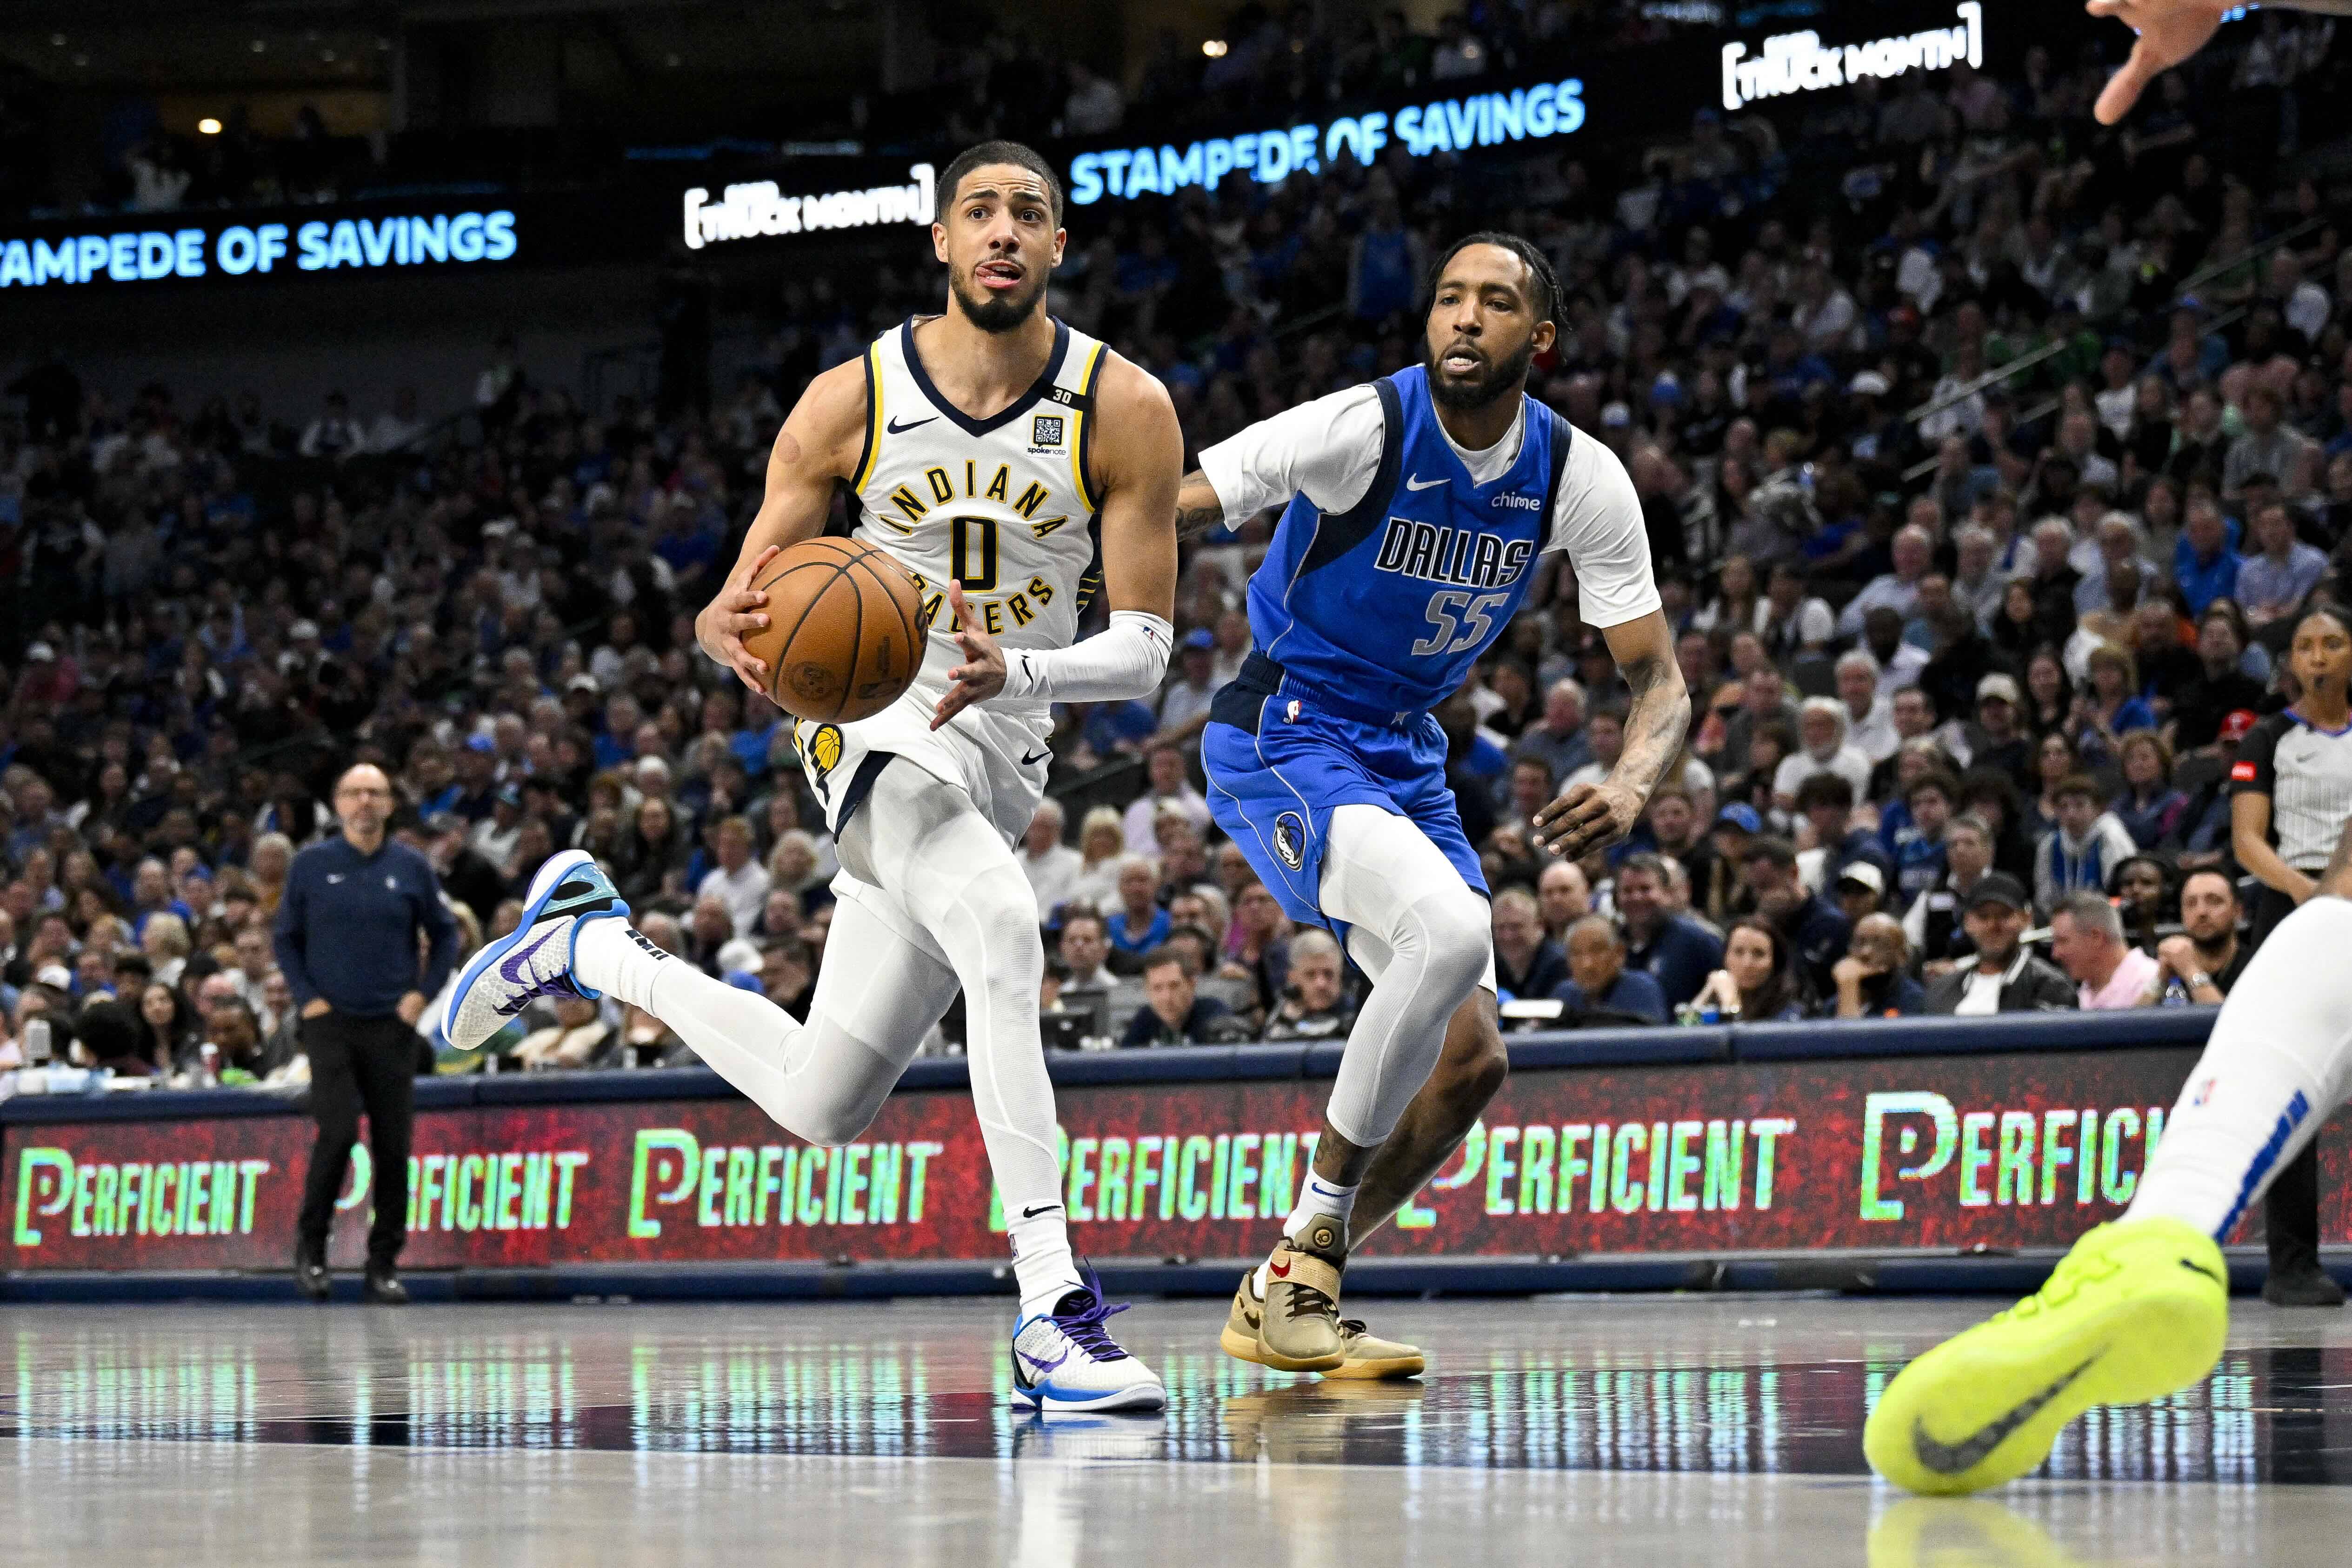 NBA: Nine Pacers score in double figures in win over Mavs